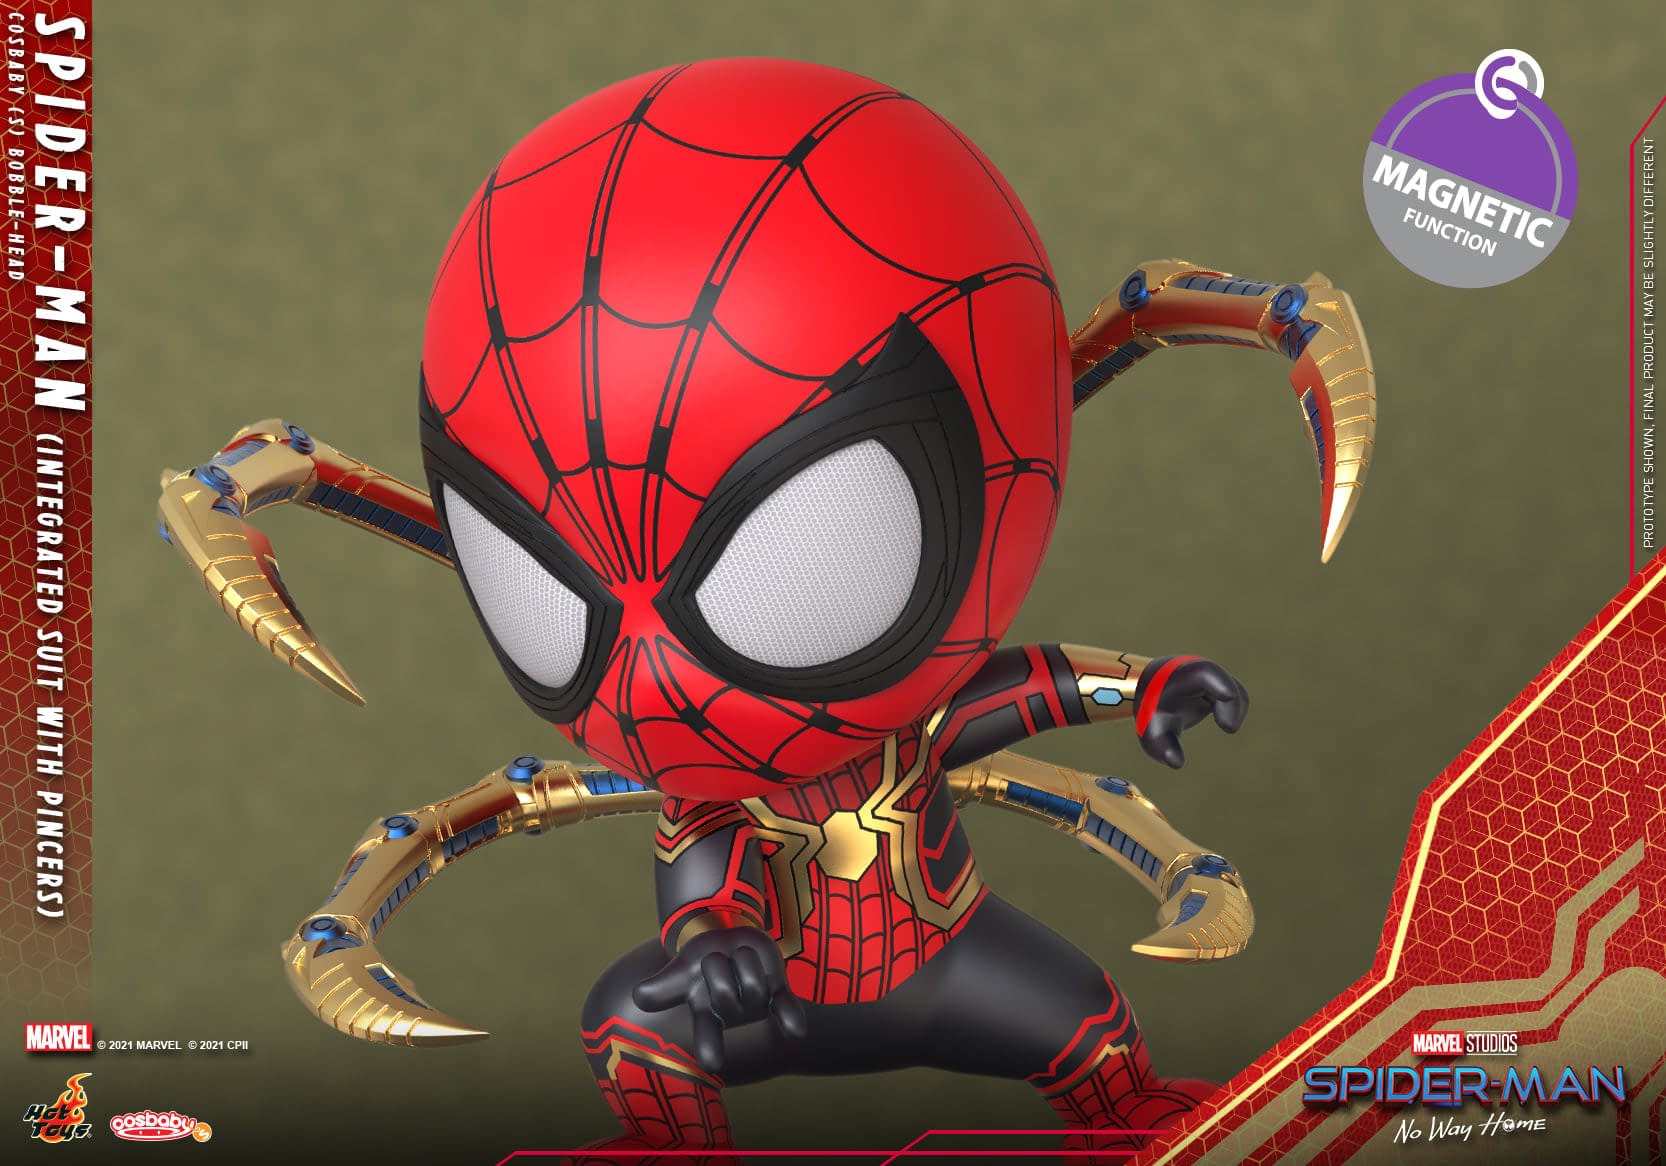 Hot Toys Reveals New Spider-Man: No Way Home Cosbaby Figures